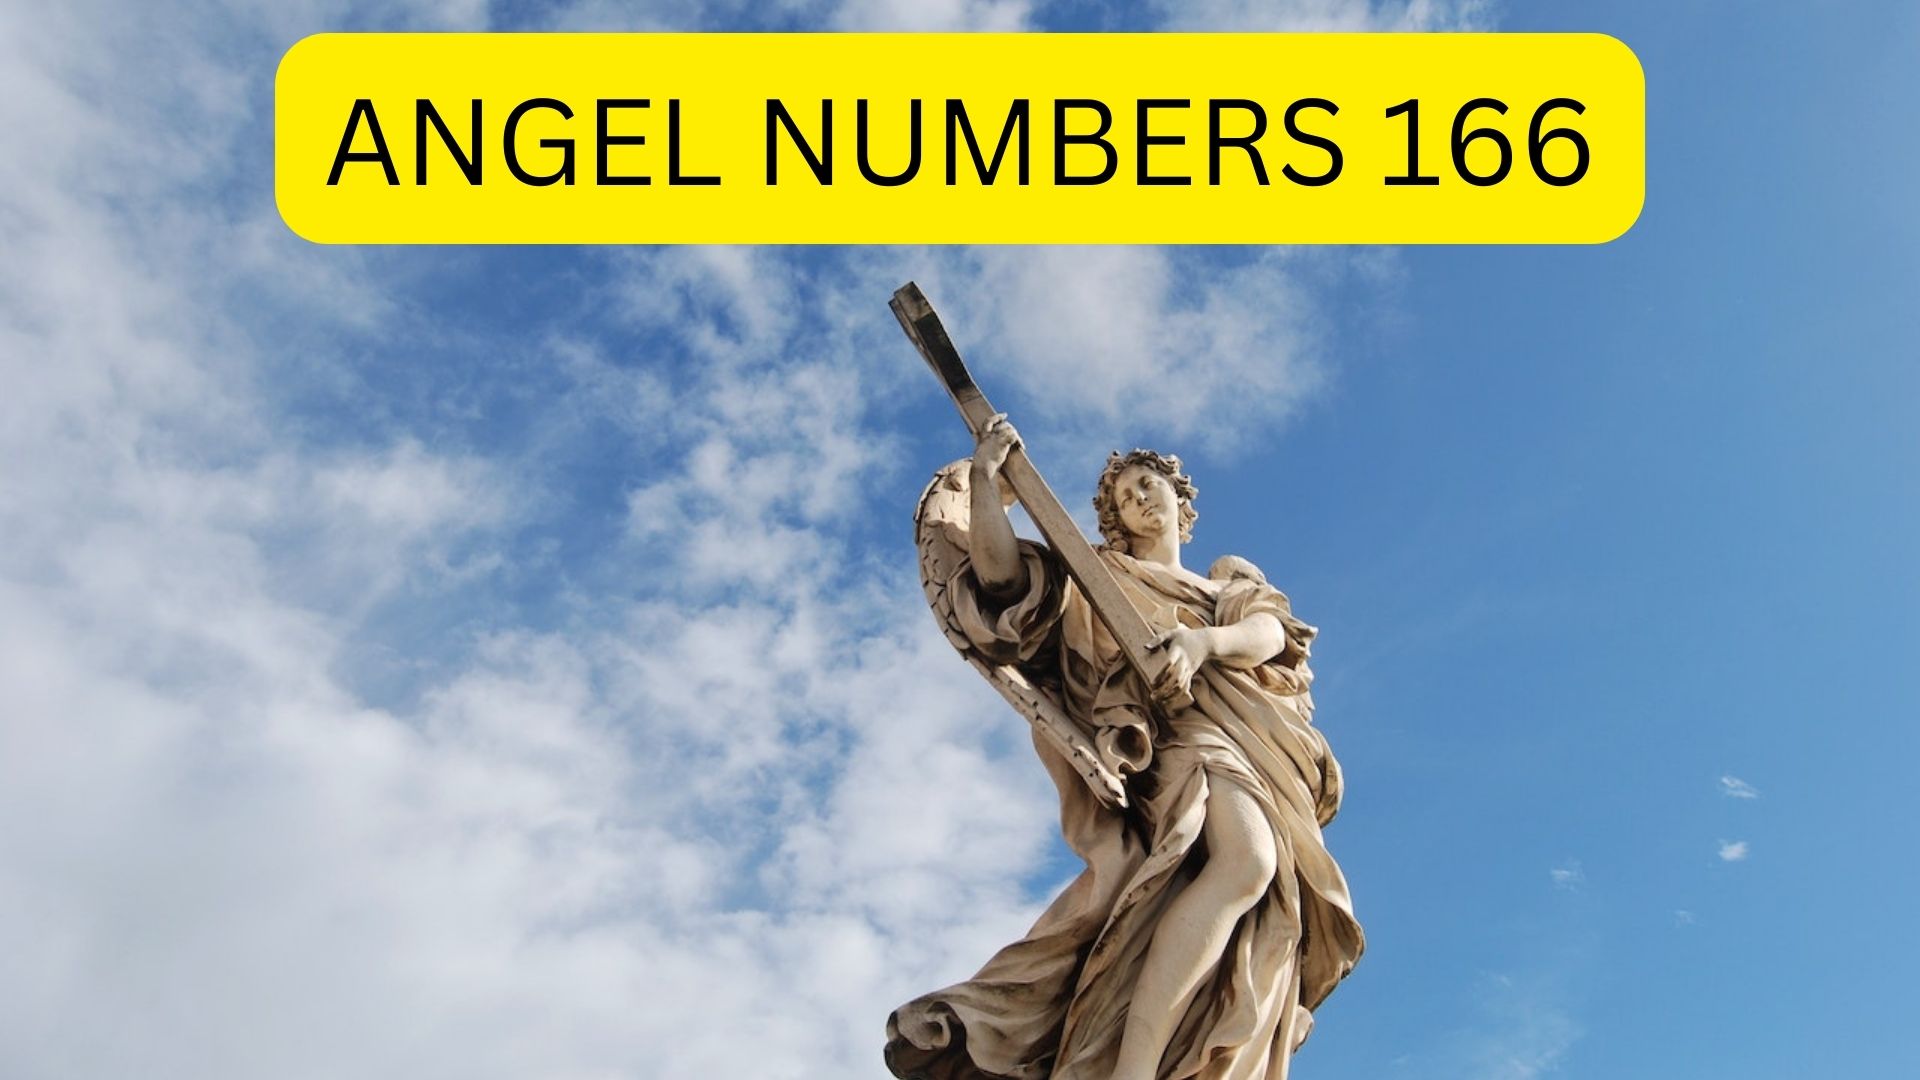 Angel Numbers 166 - Numerology Combination Of 1 And 6 Energies